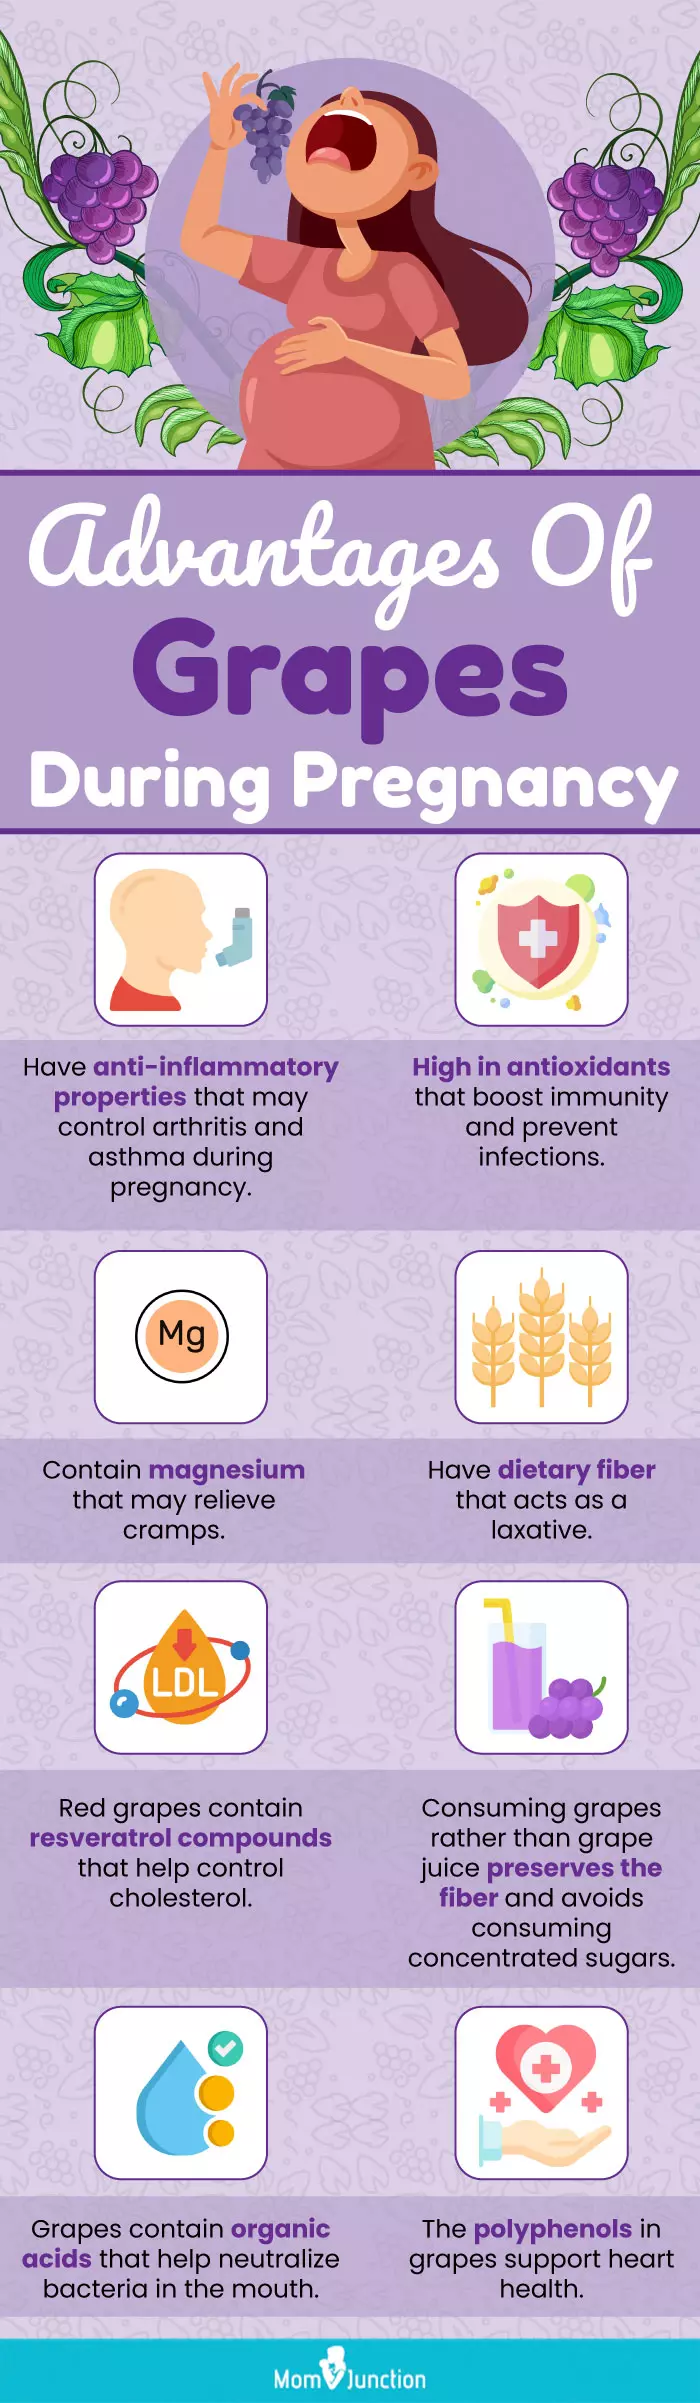 advantages of grapes during pregnancy (infographic)